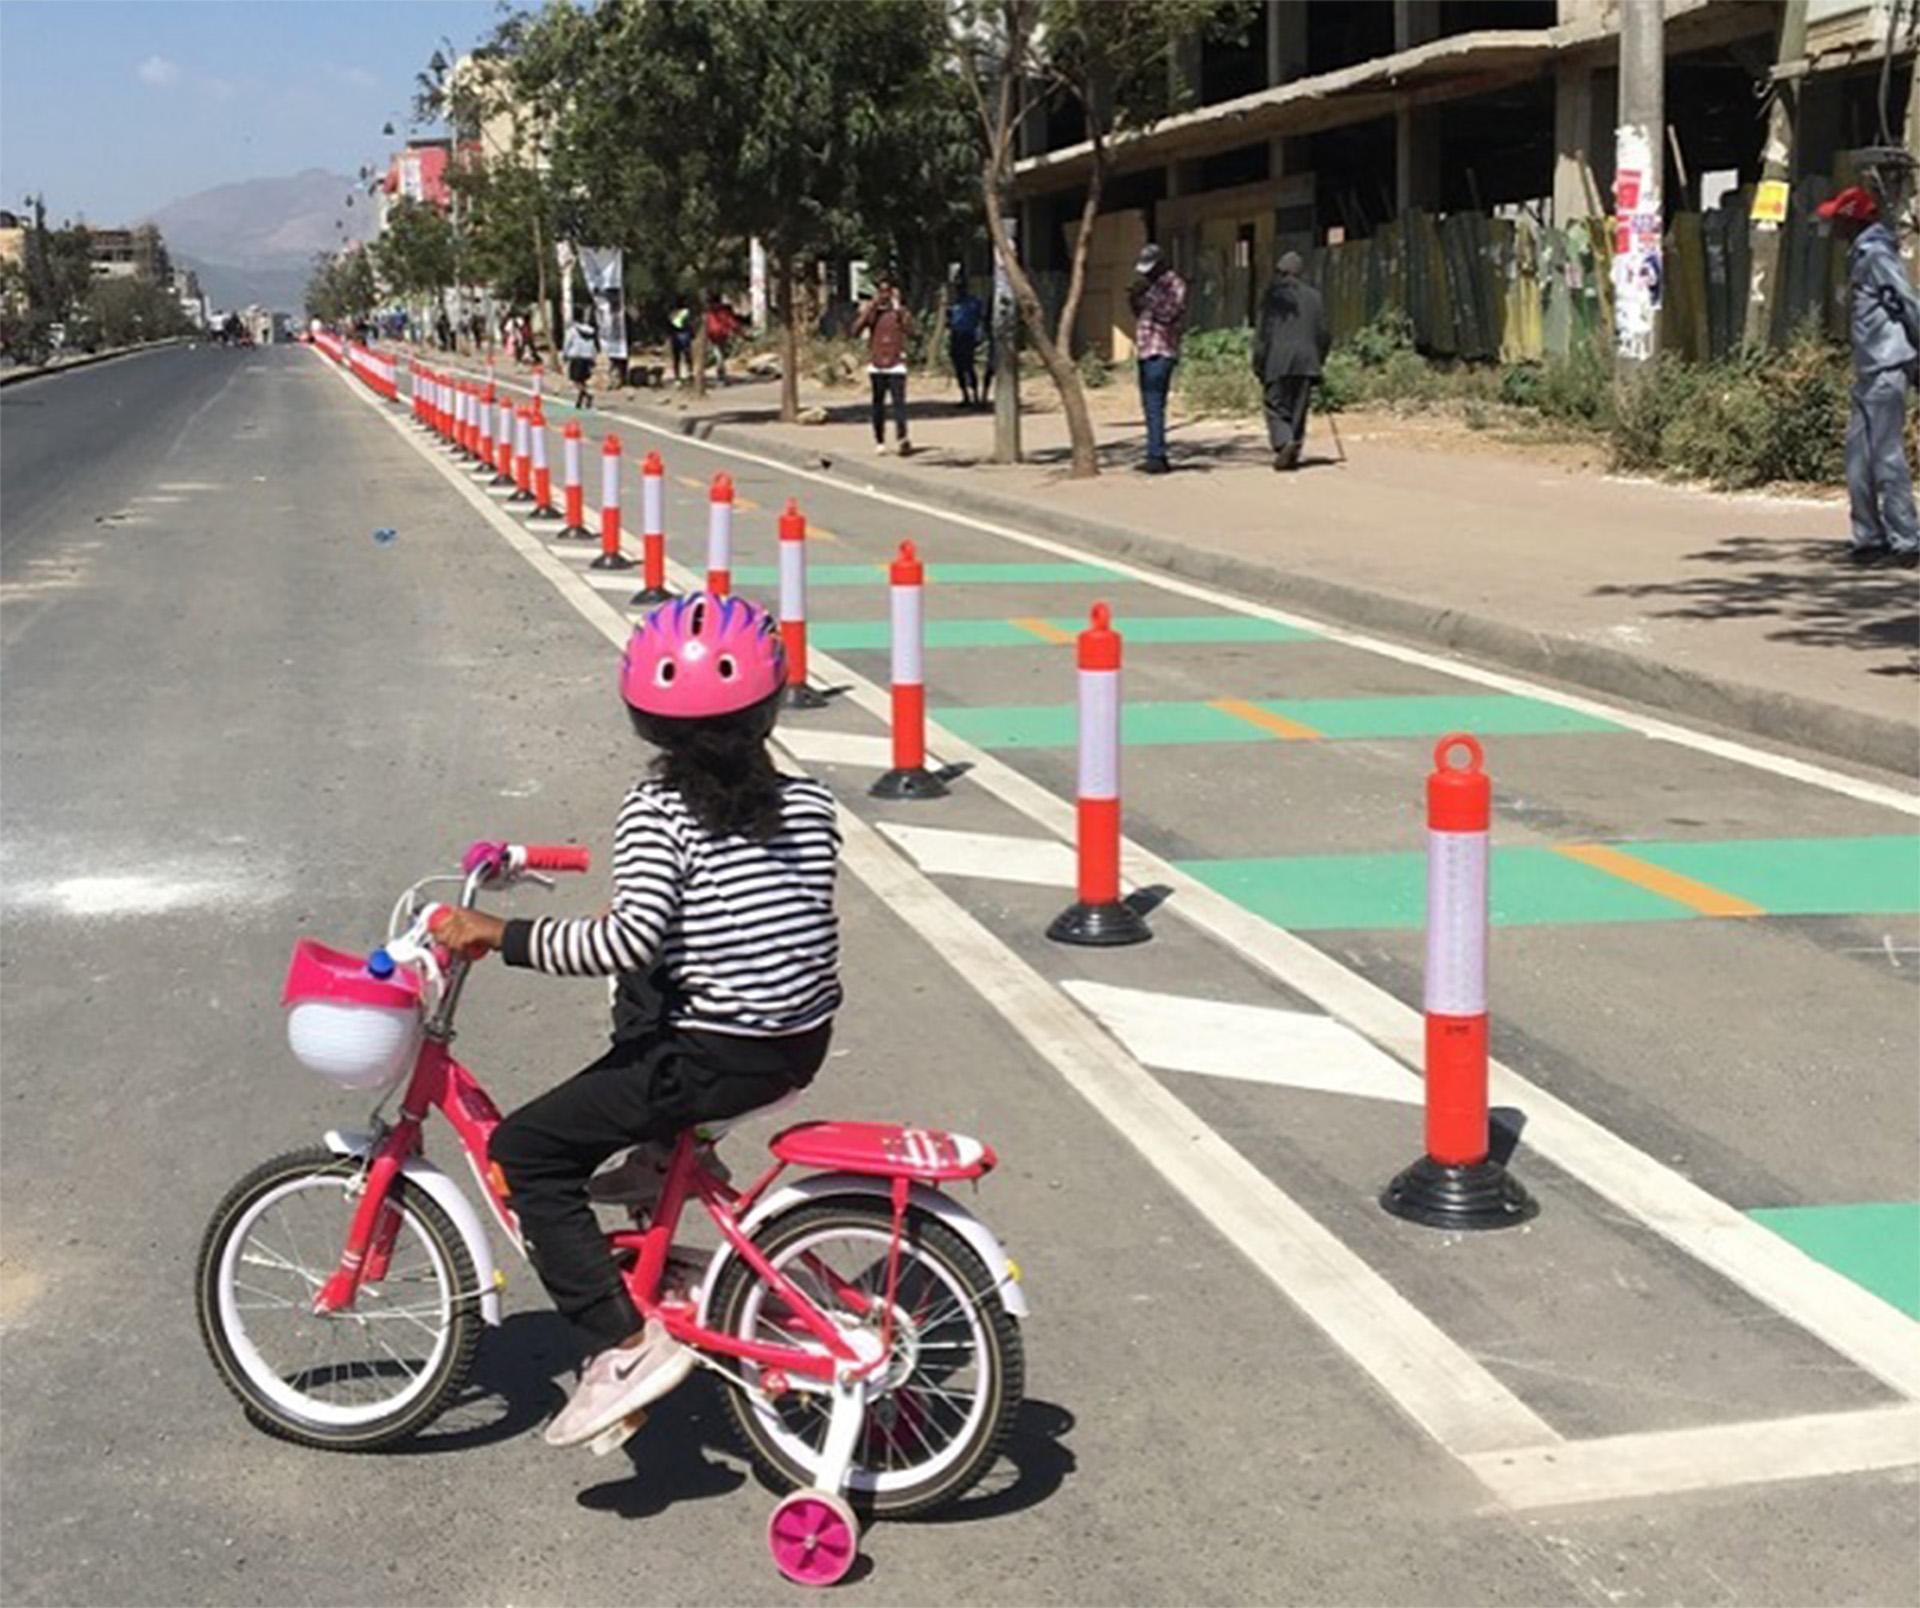 Bi-directional cycle corridor launched as part of Addis Ababa’s NMT strategy and safe cycling program